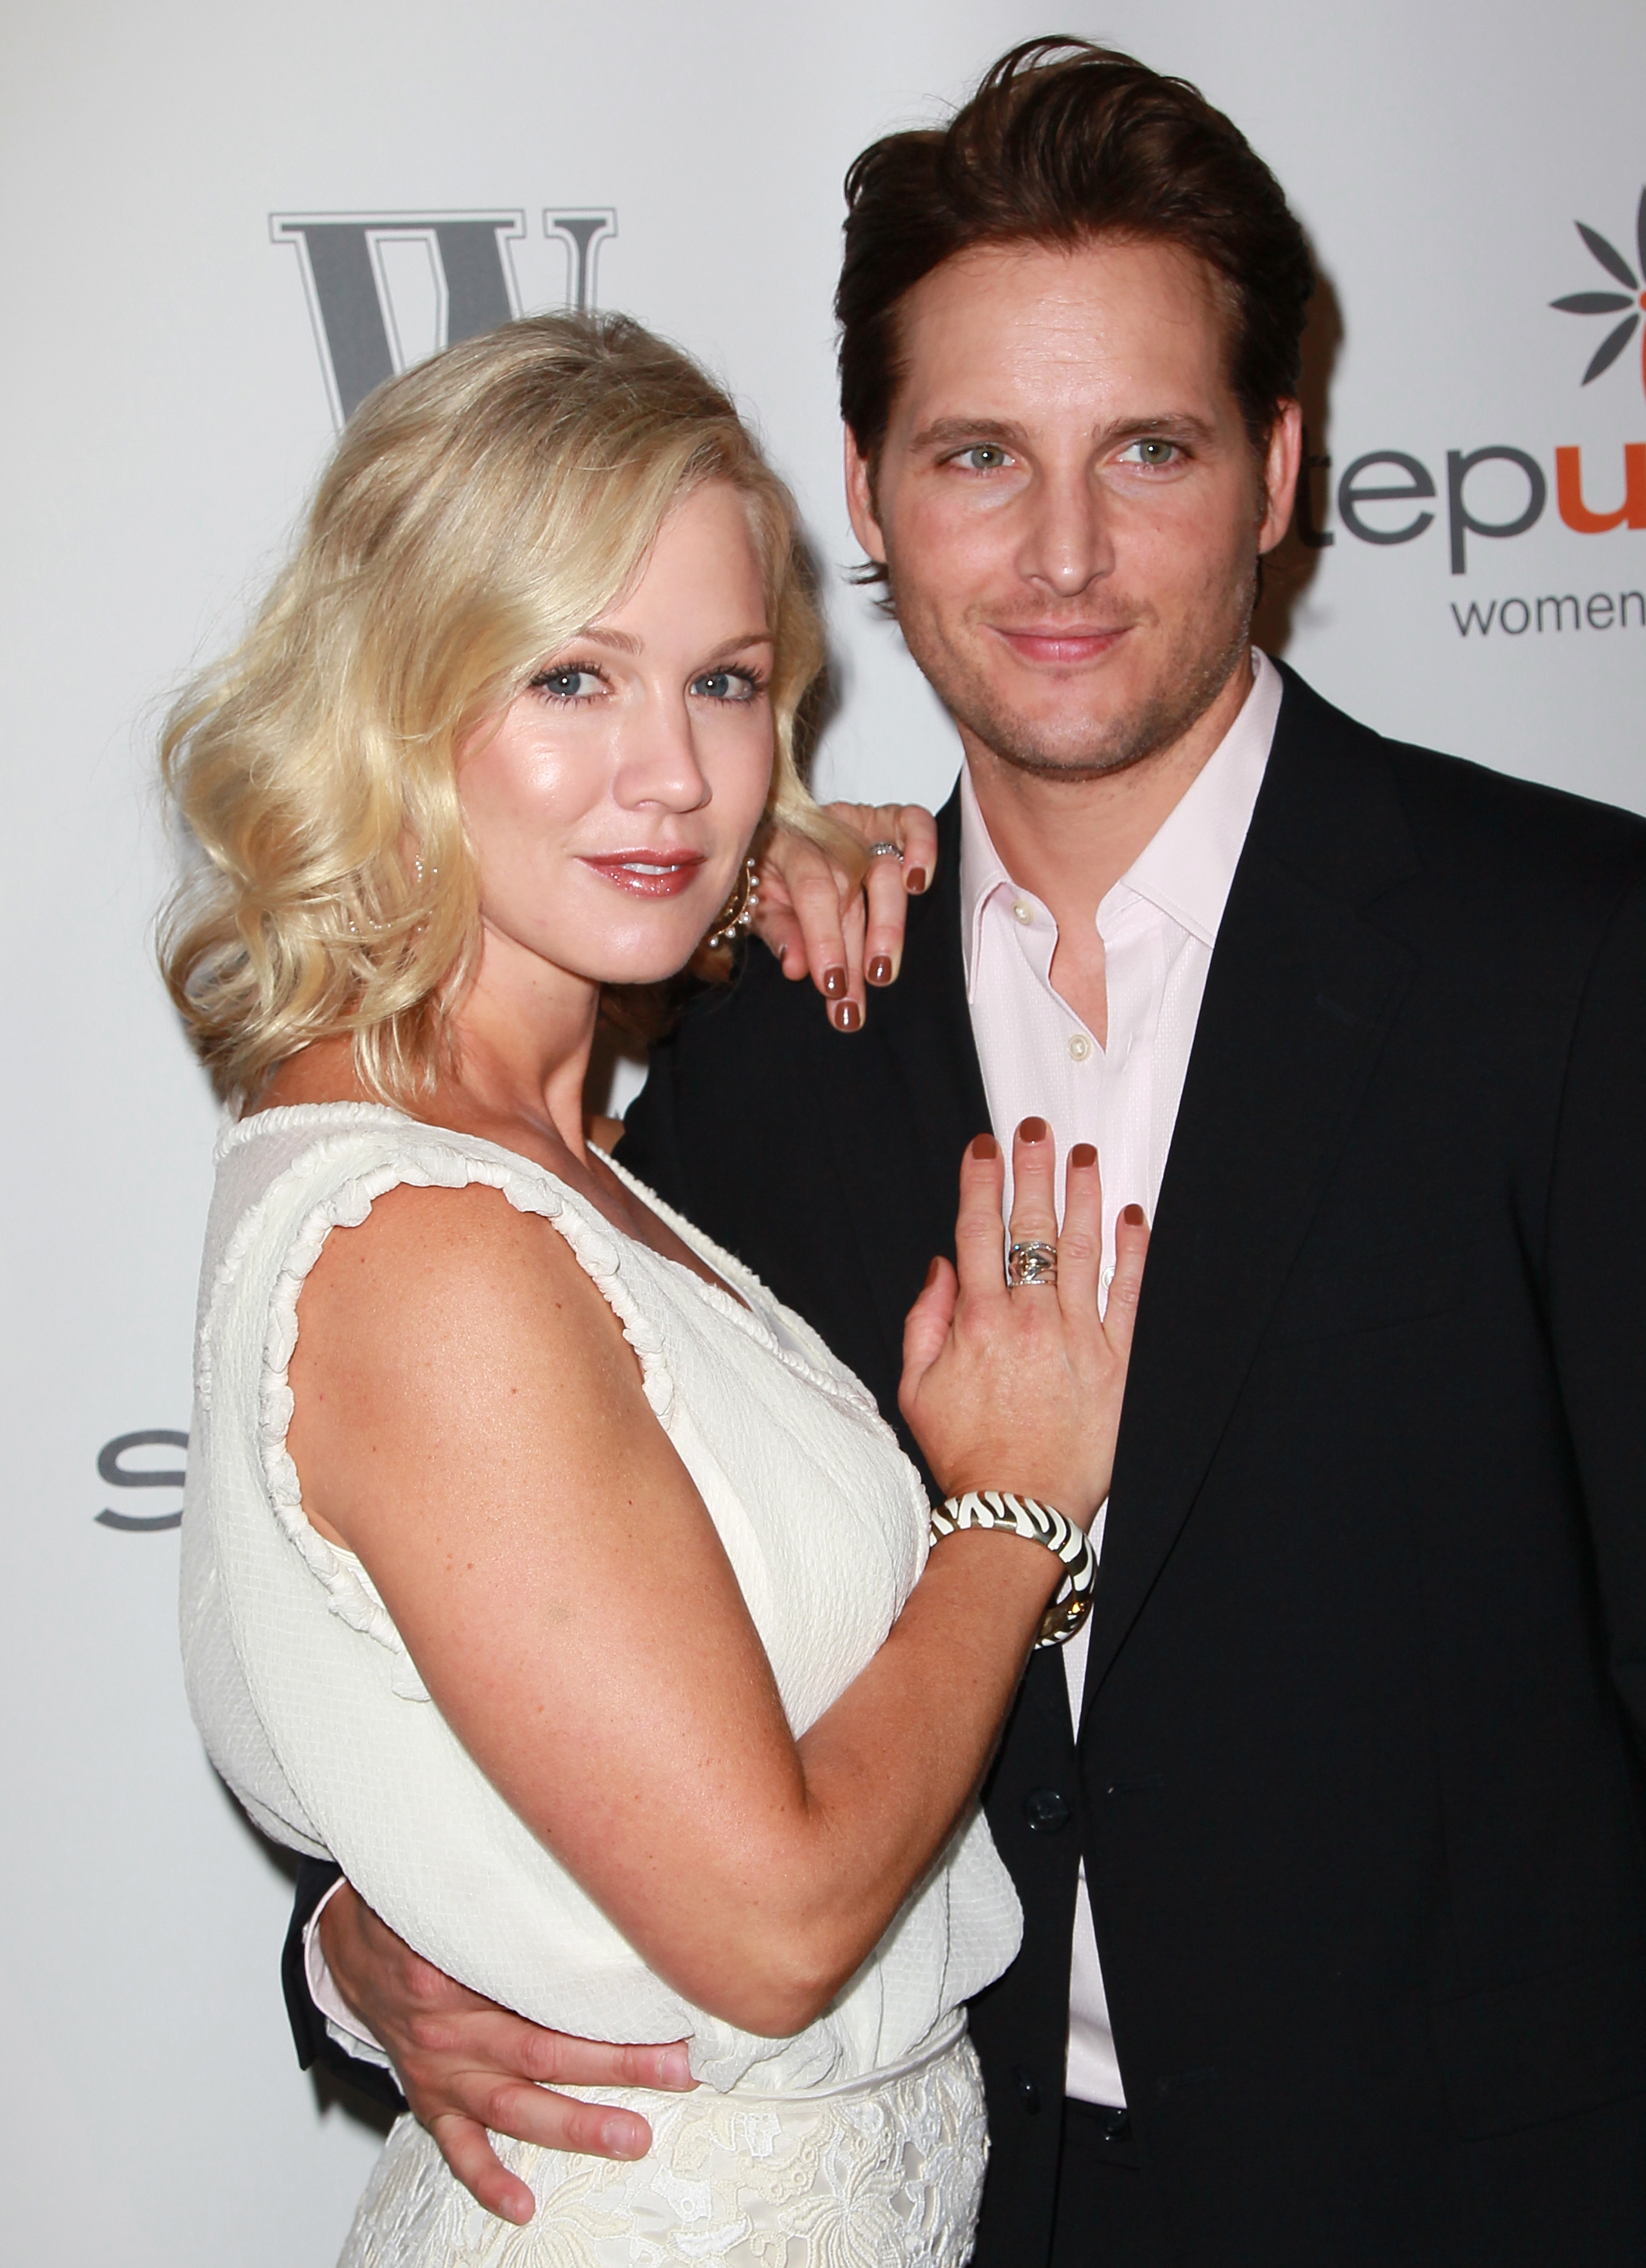 Jennie Garth was married to actor Peter Facinelli from 2001 until 2013 — the two share three daughters together